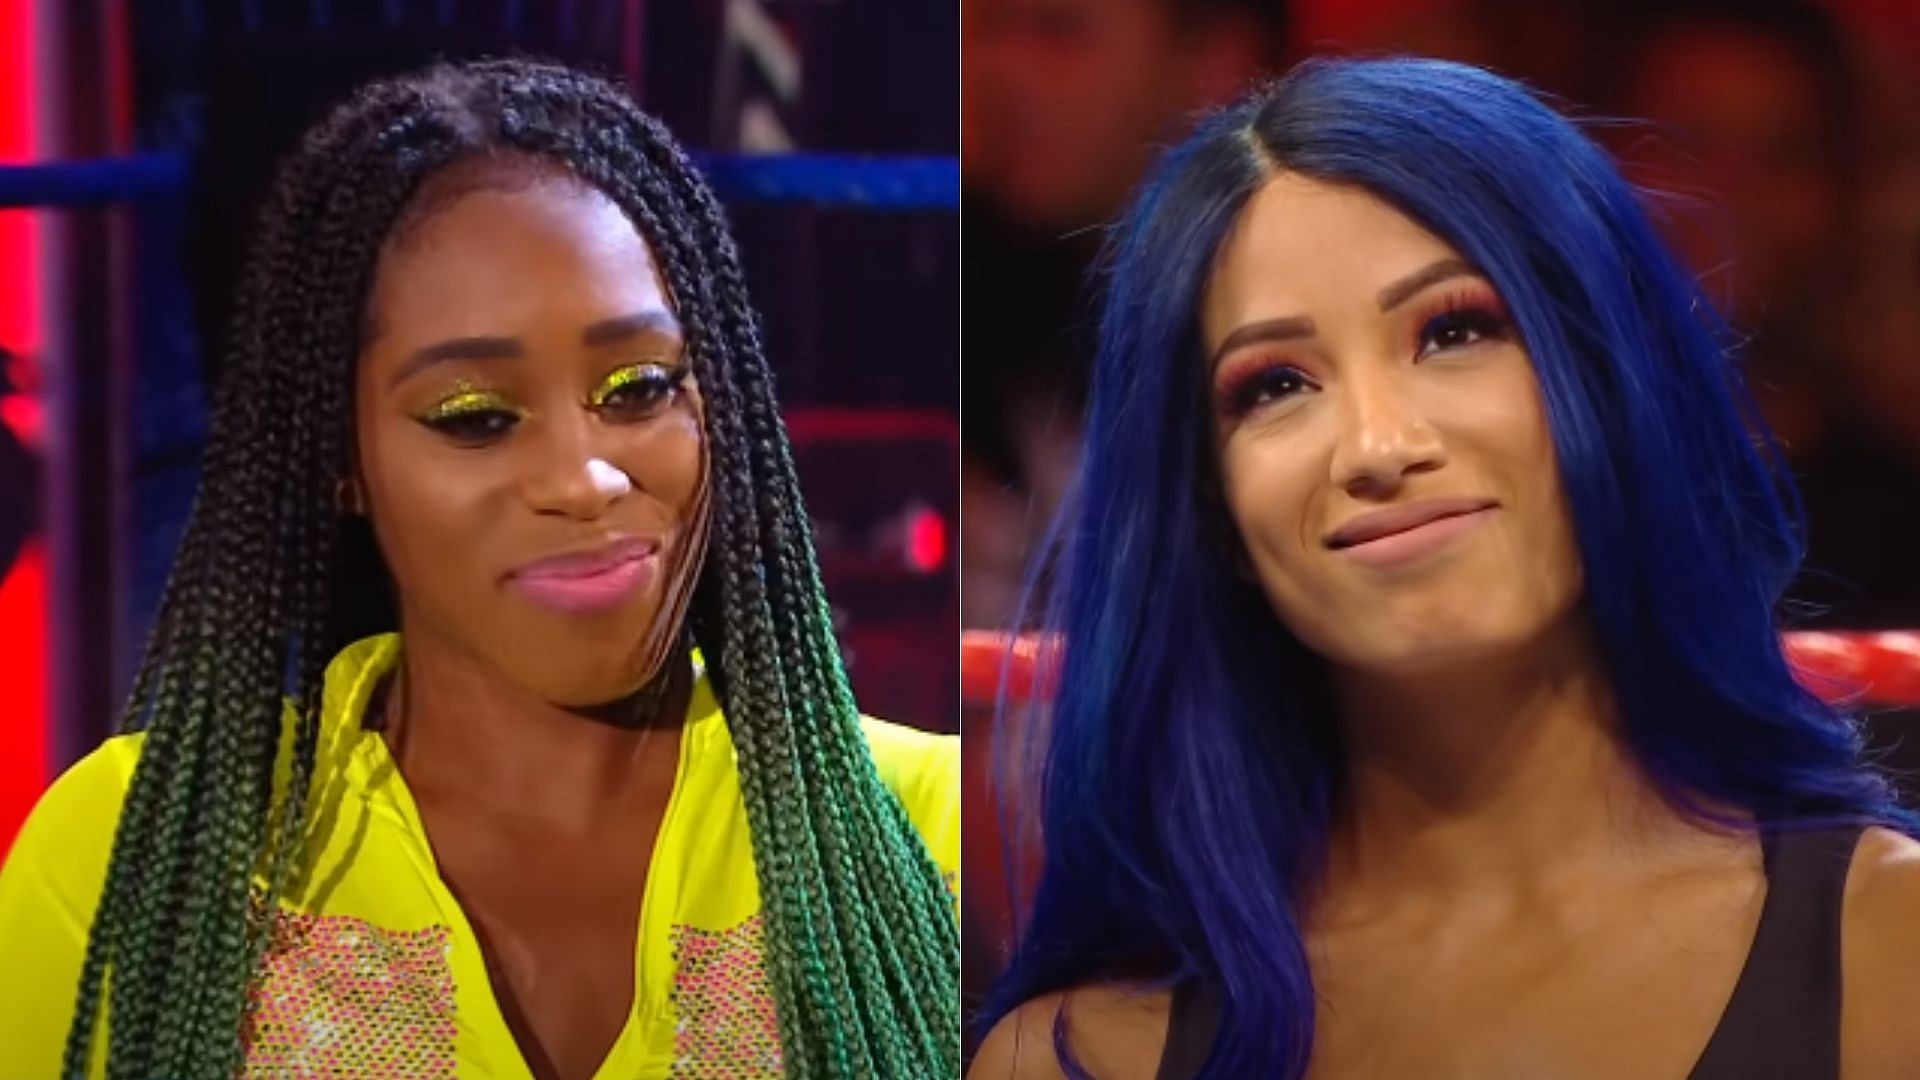 The former Women&#039;s Tag Team Champions&#039; futures remain uncertain.